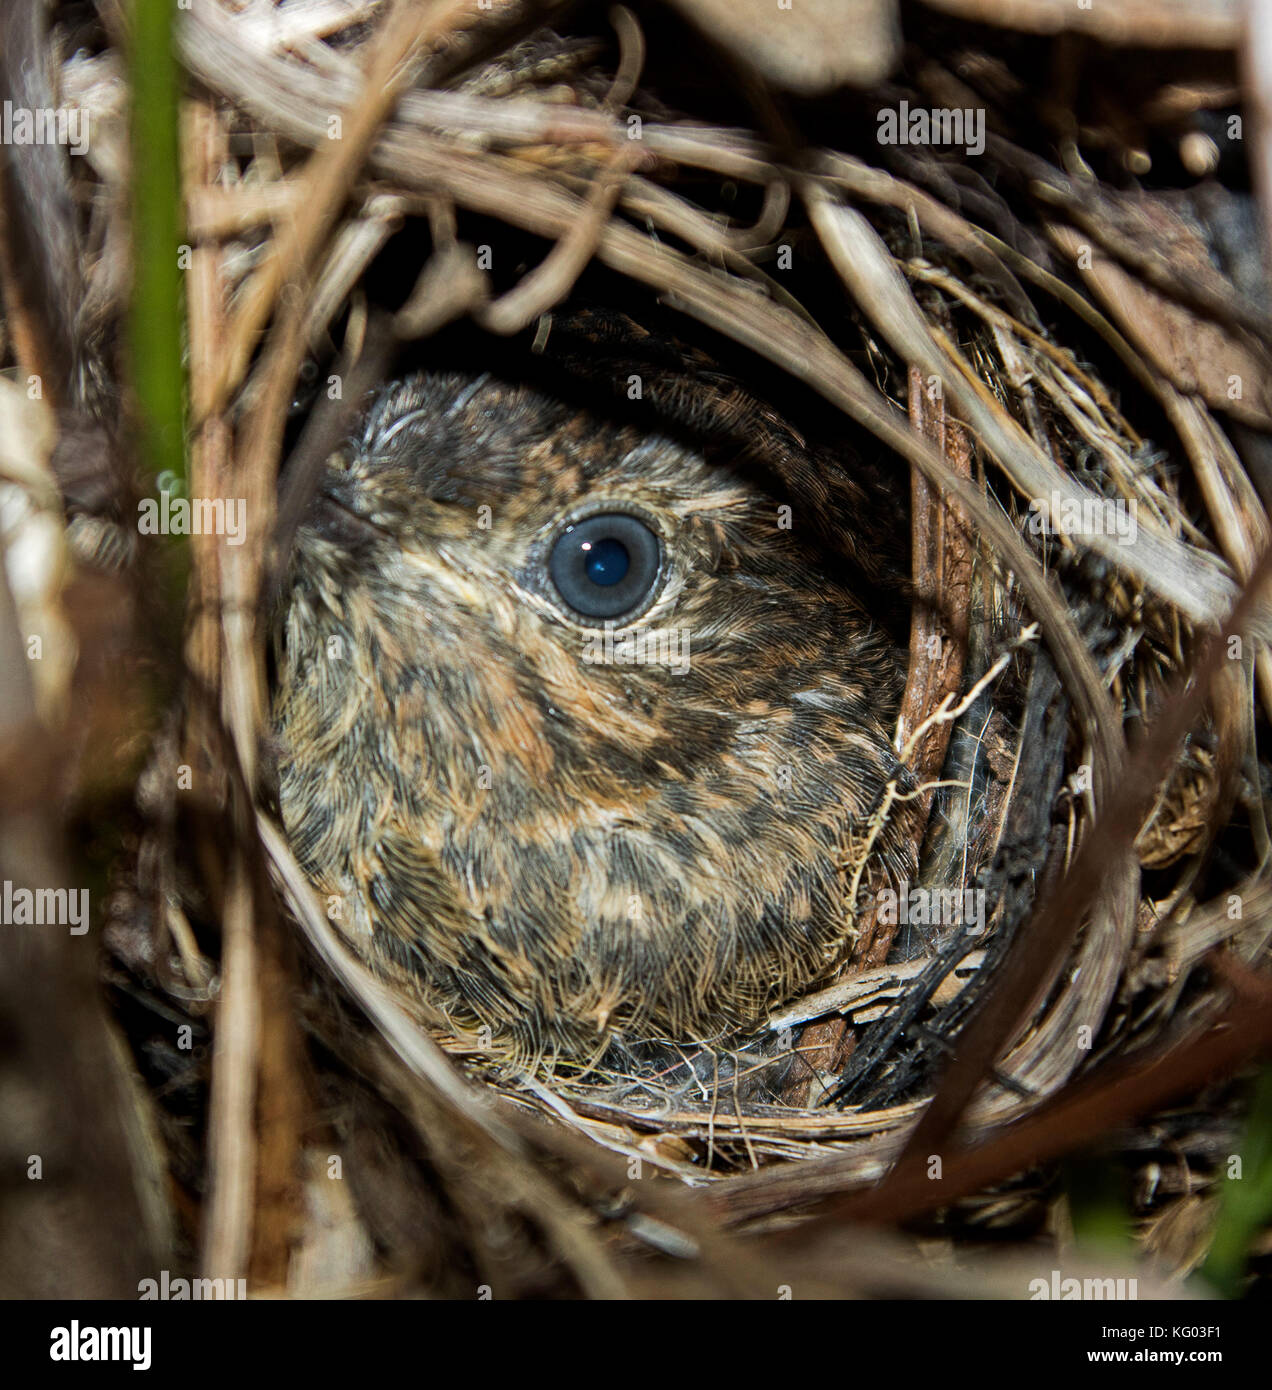 Chick of Australian white-browed scrub wren, Sericornis frontalis, peering, with alert expression, from nest of sticks in garden Stock Photo